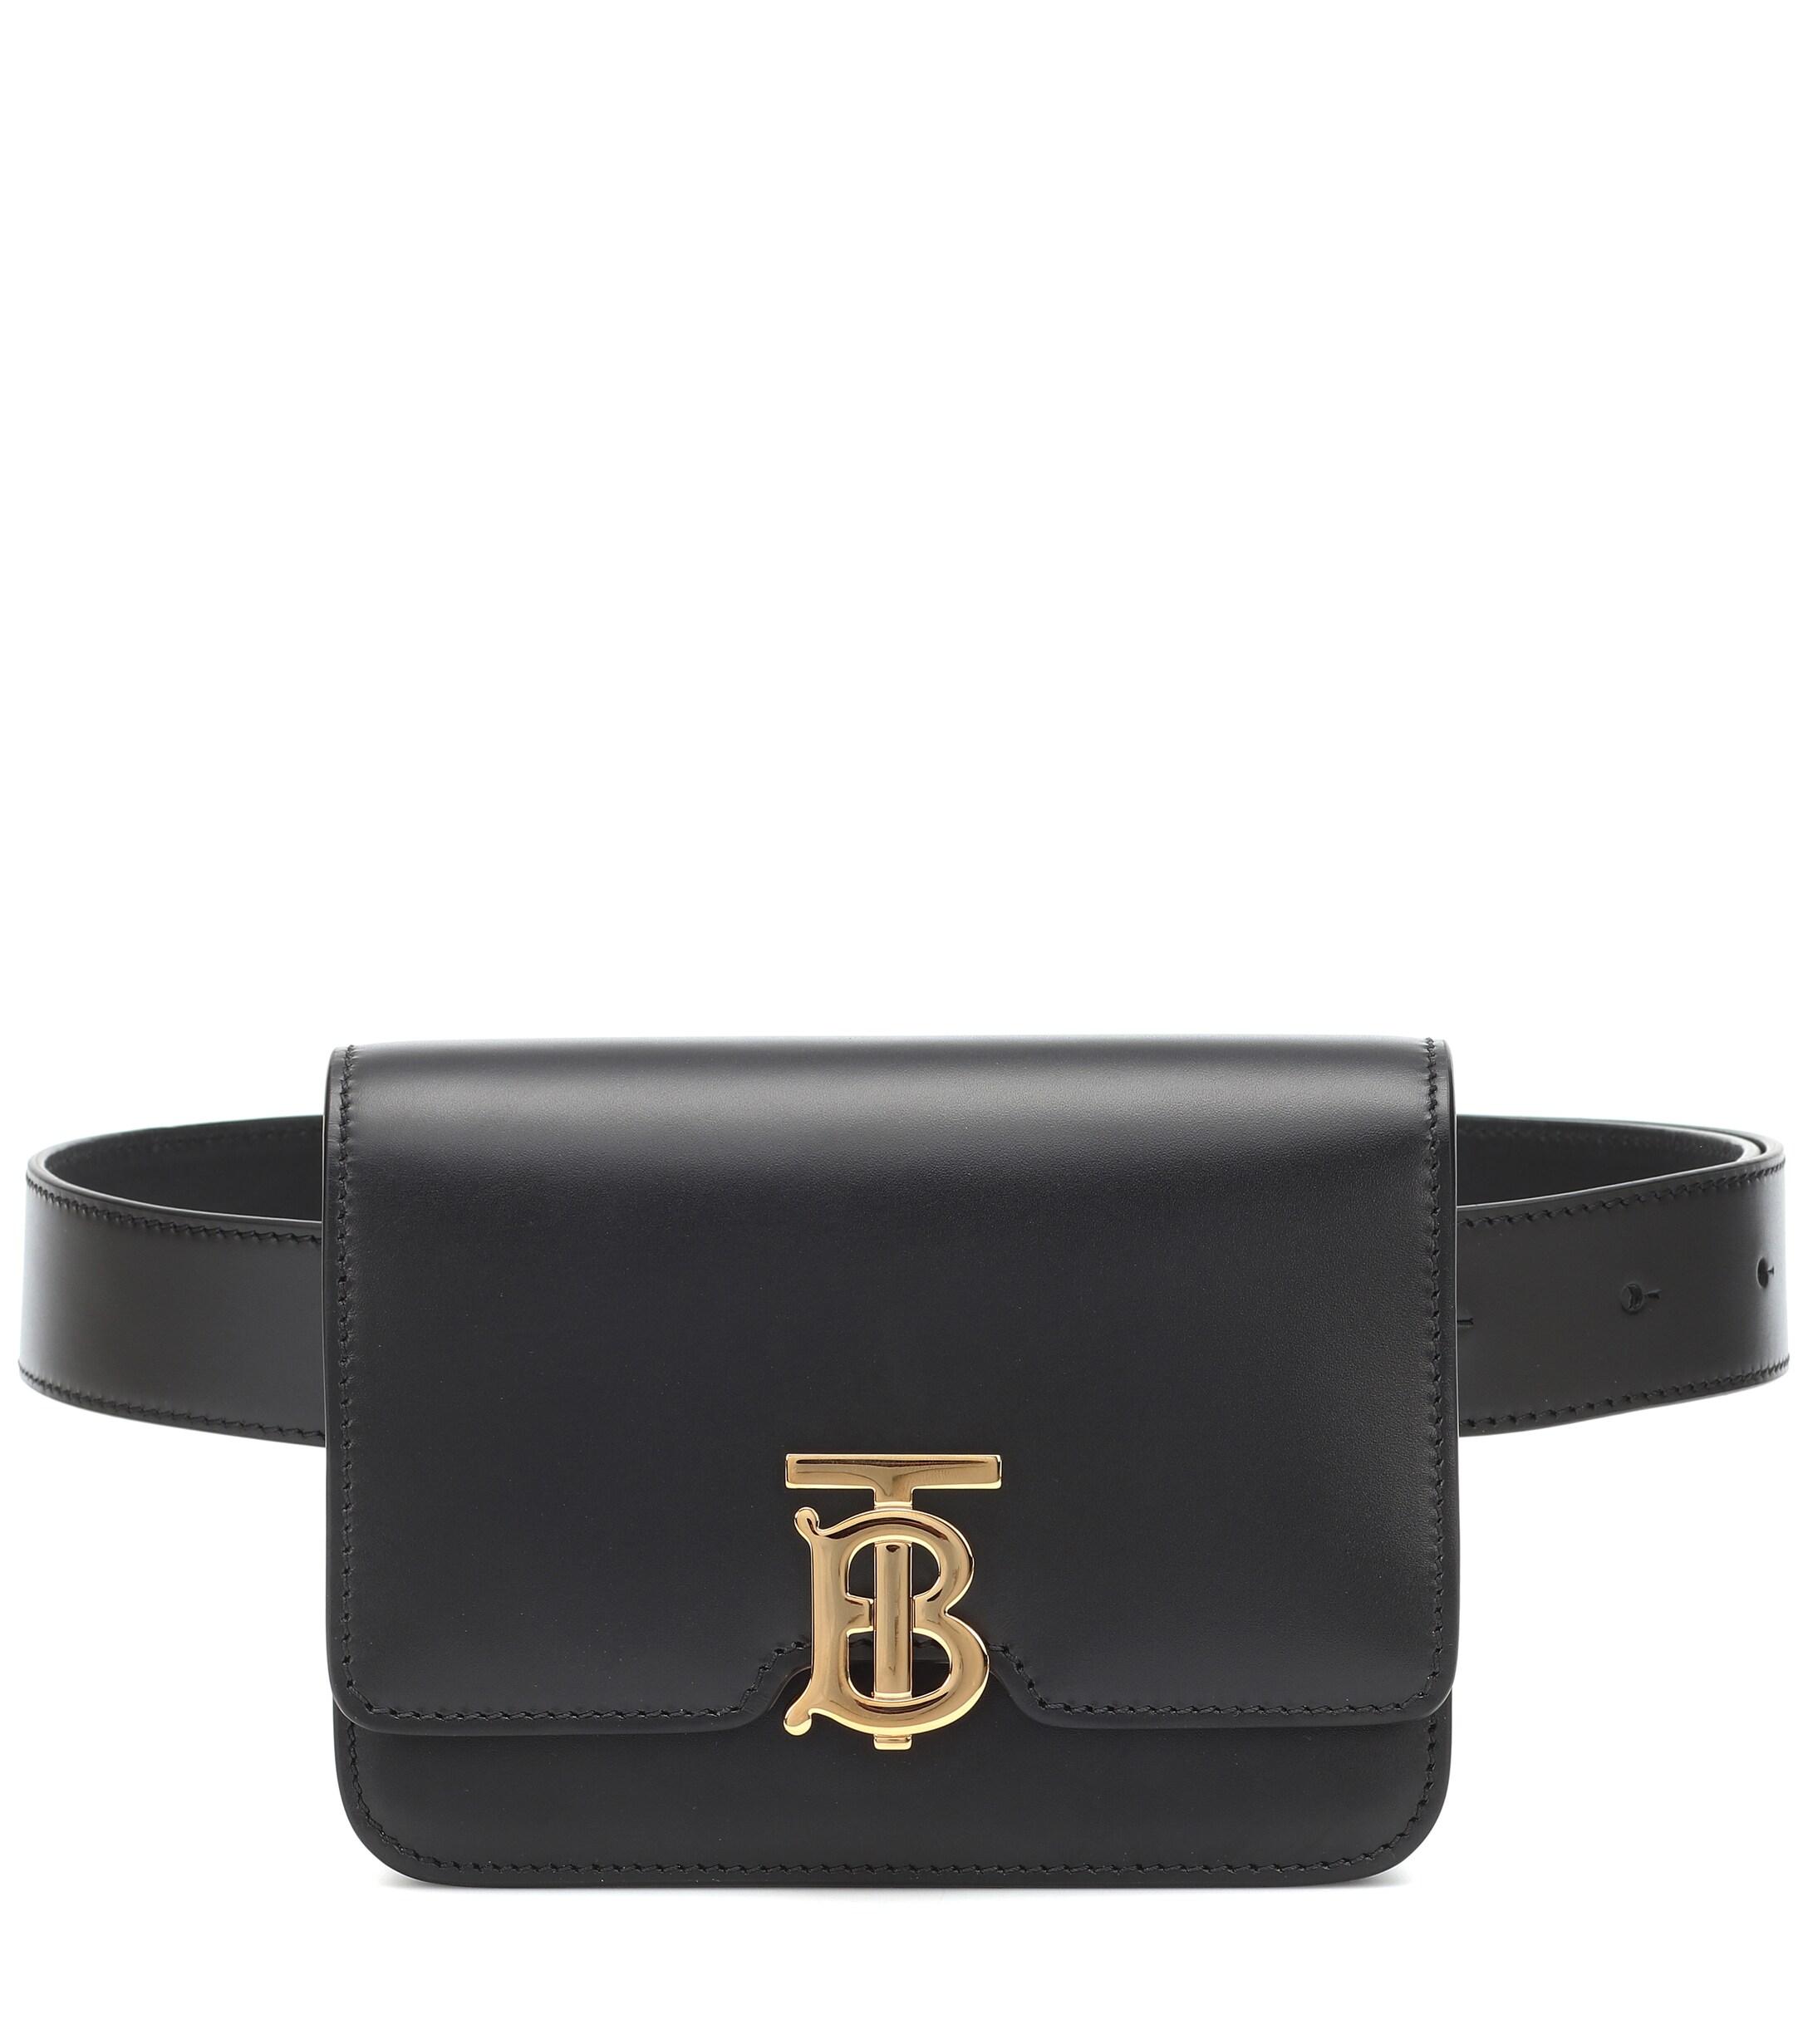 Burberry Leather Tb Bum Bag in Black - Lyst